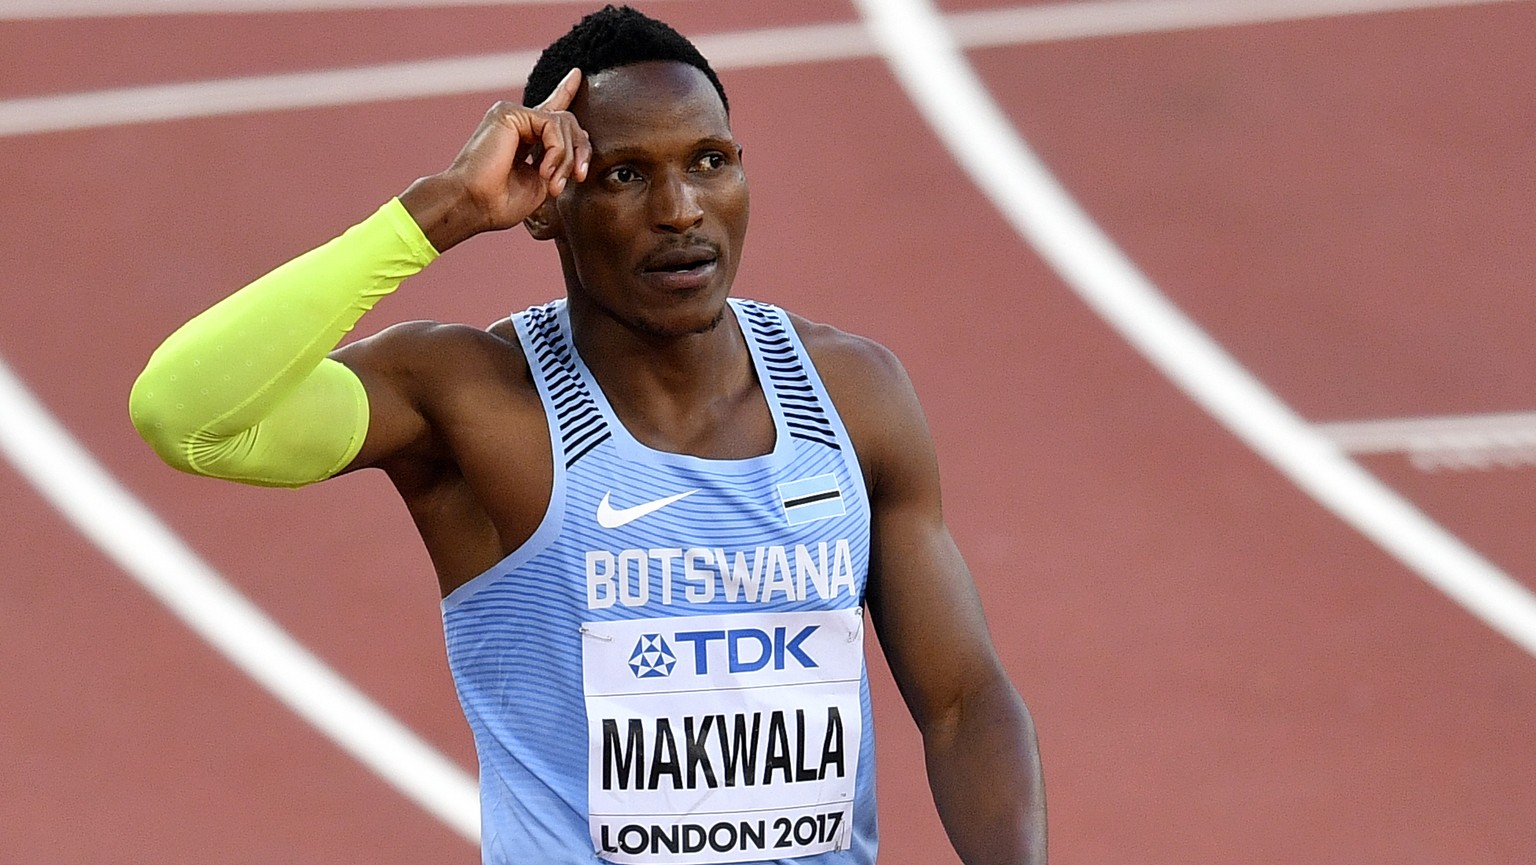 Botswana&#039;s Isaac Makwala reacts after winning his heat of the Men&#039;s 400 meters during the World Athletics Championships in London Sunday, Aug. 6, 2017. (AP Photo/Martin Meissner)